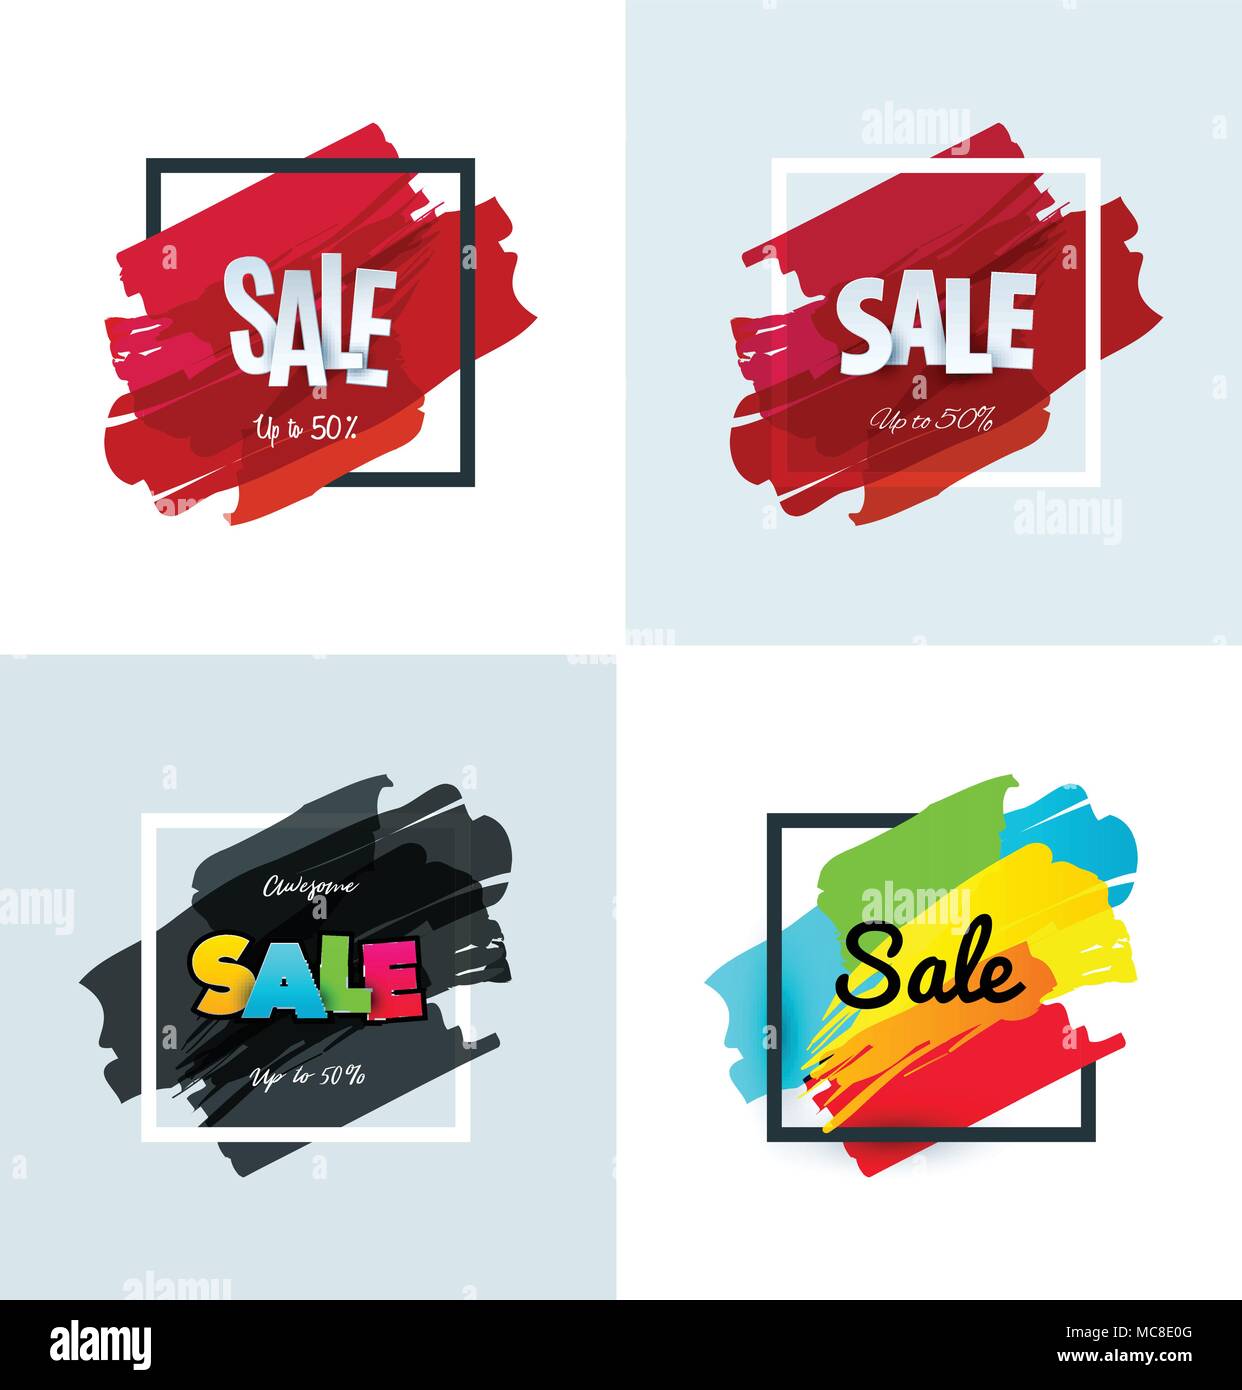 Special sale all item template design Royalty Free Vector